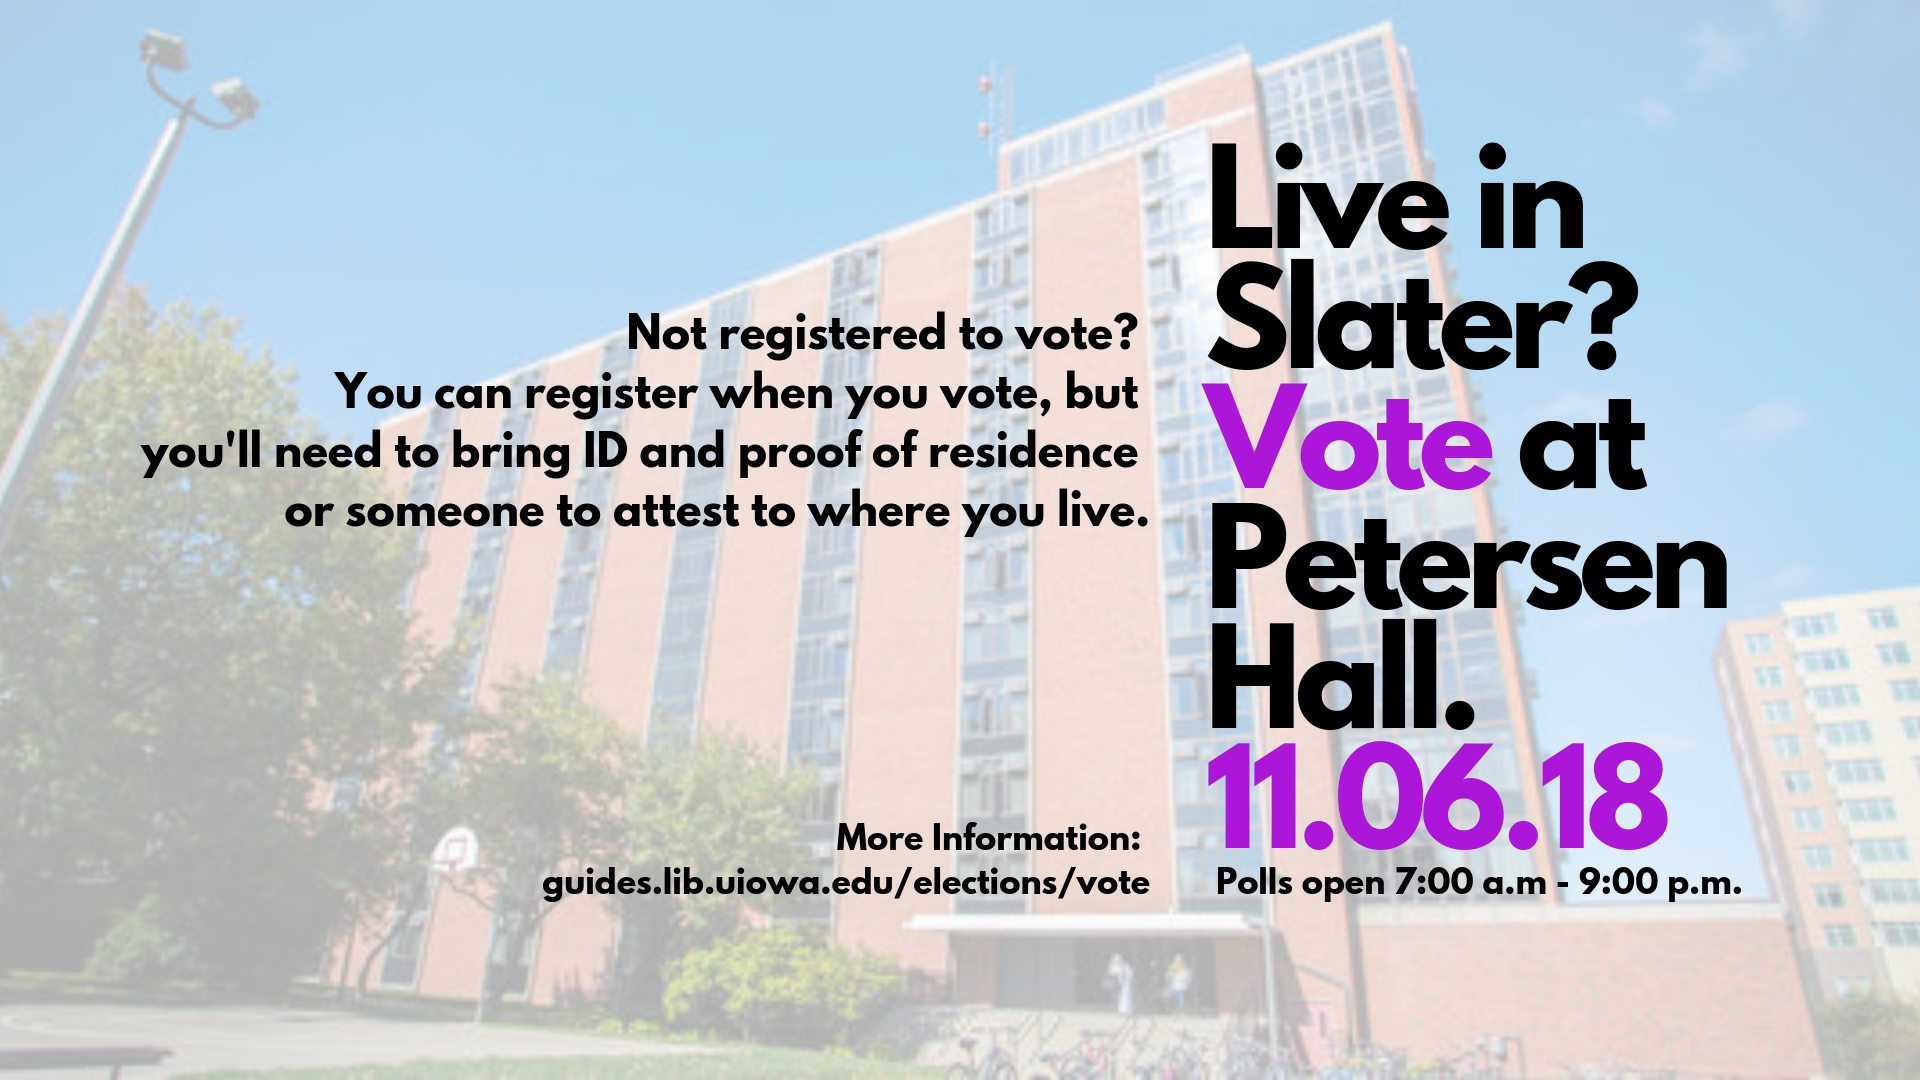 Slater Polling Place is Petersen Hall